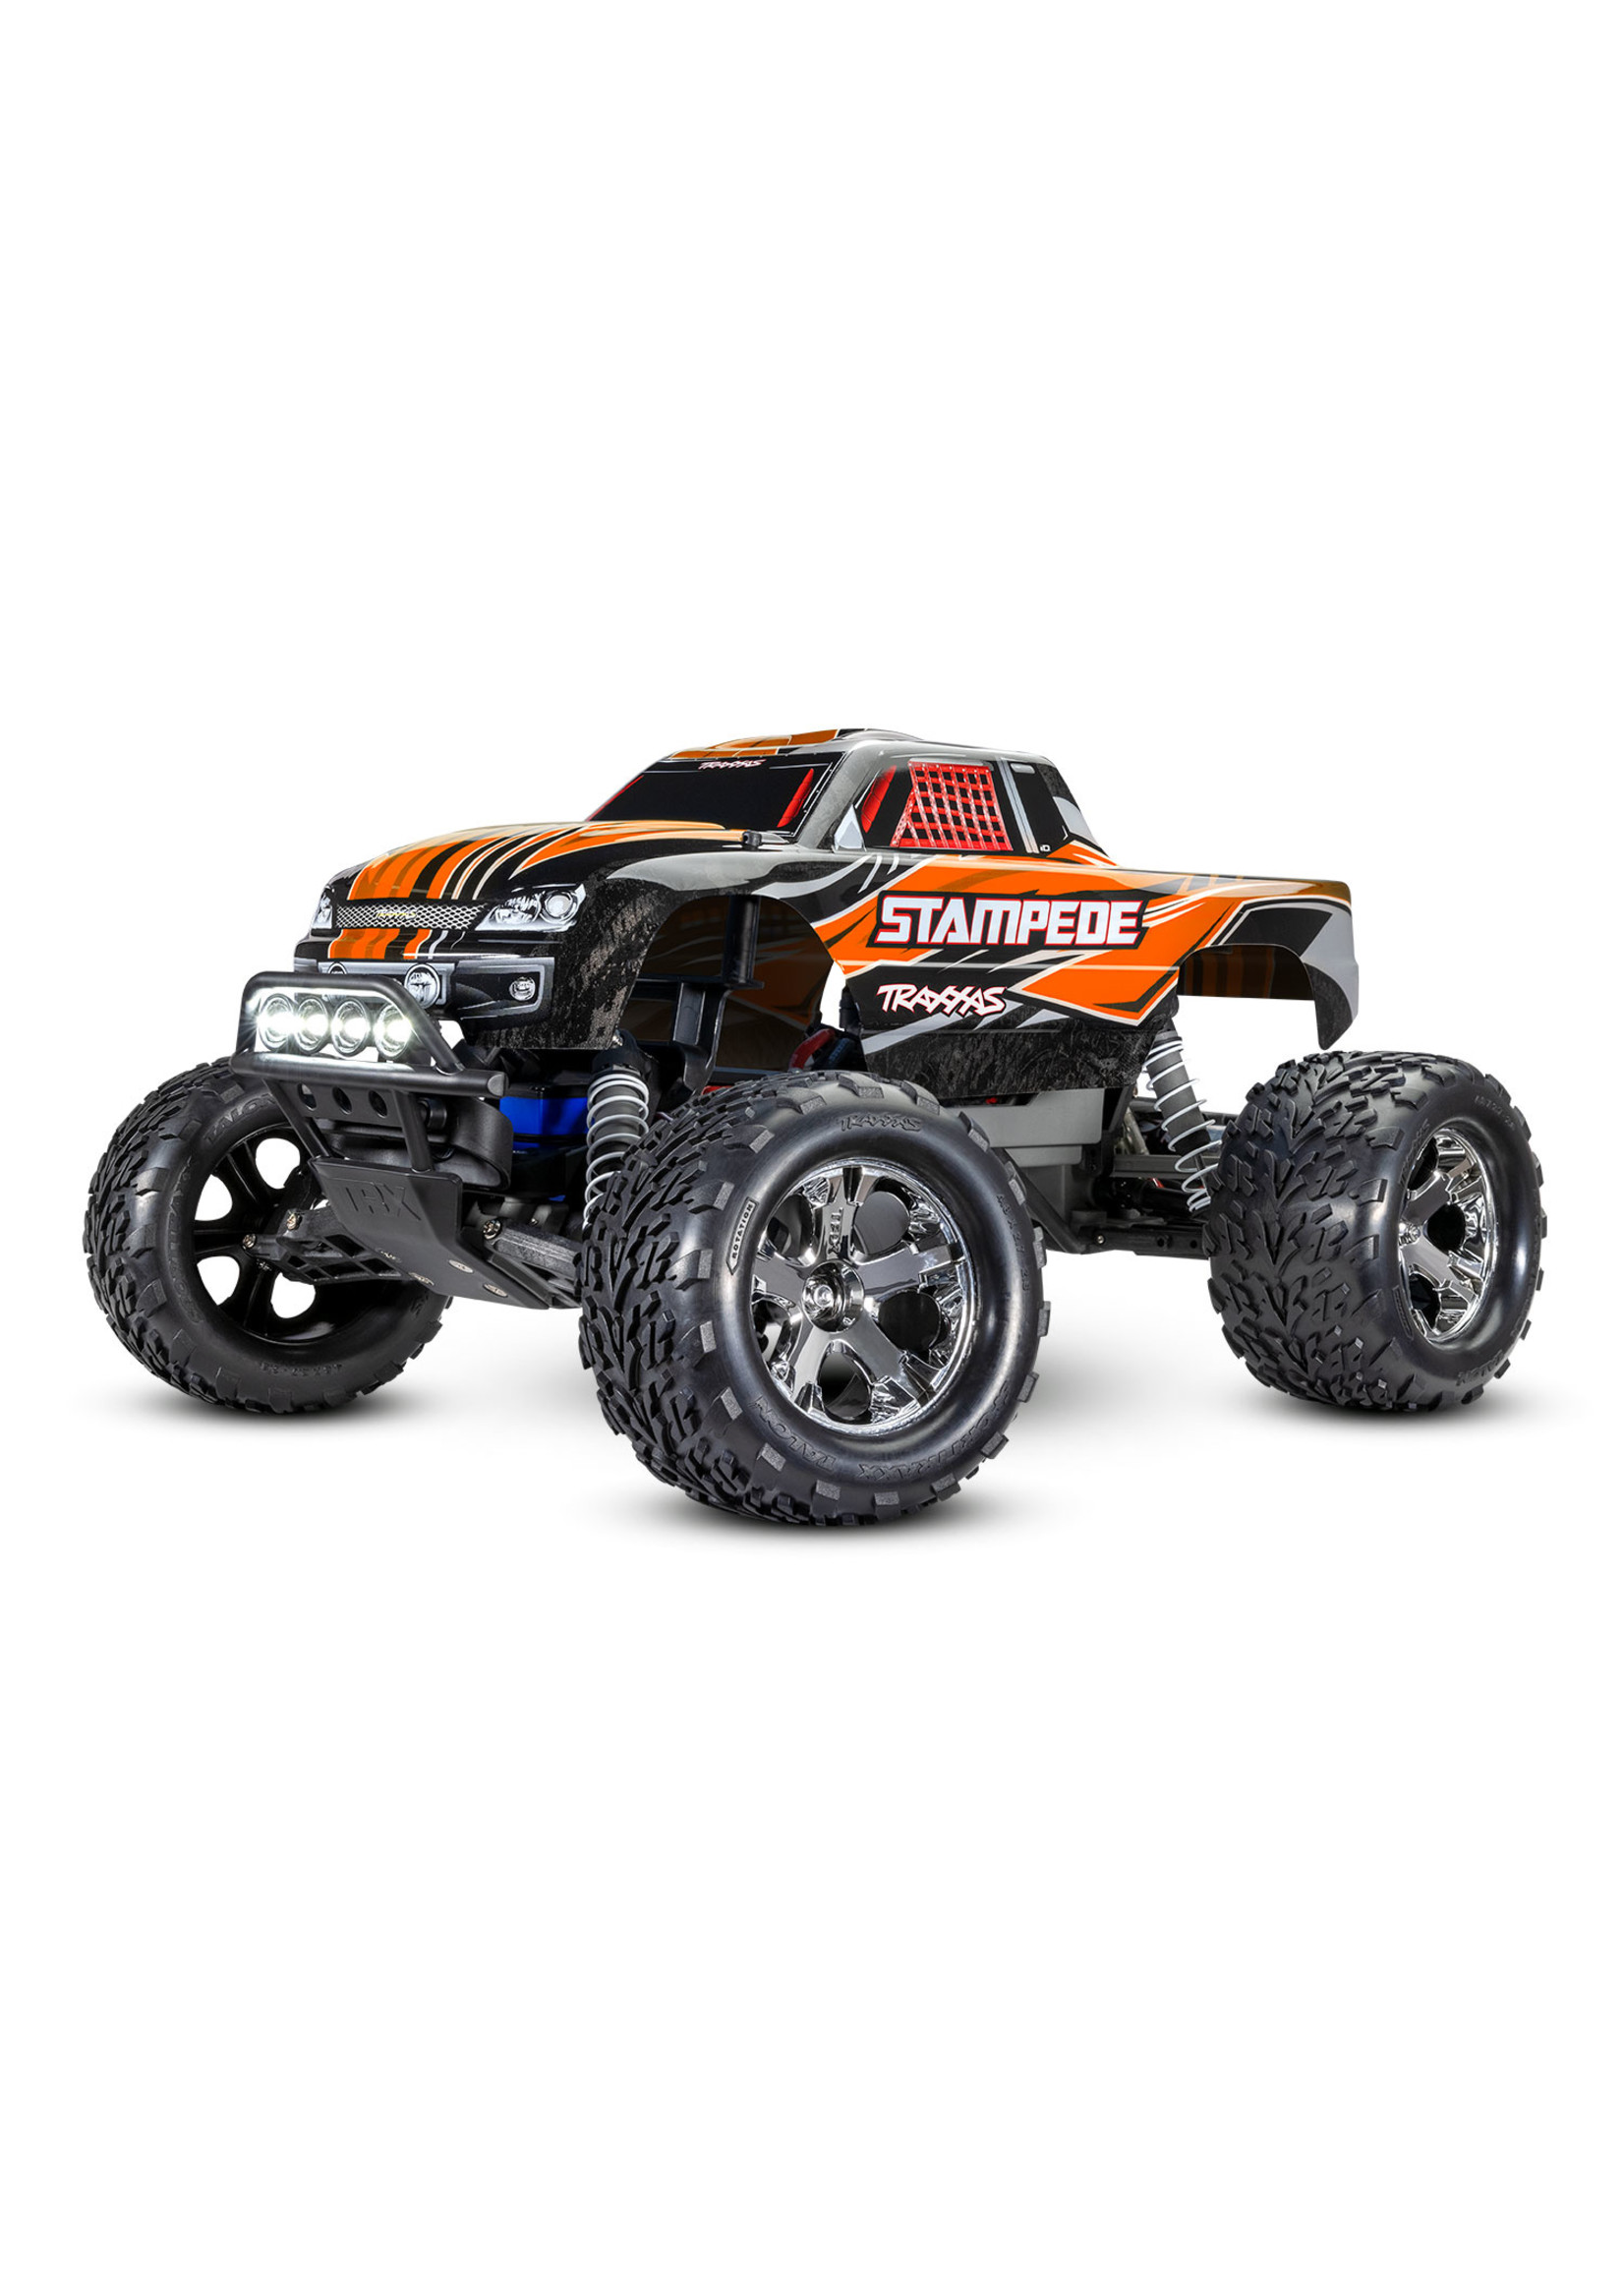 Traxxas 1/10 Stampede 2WD RTR Monster Truck with Lights - Orange